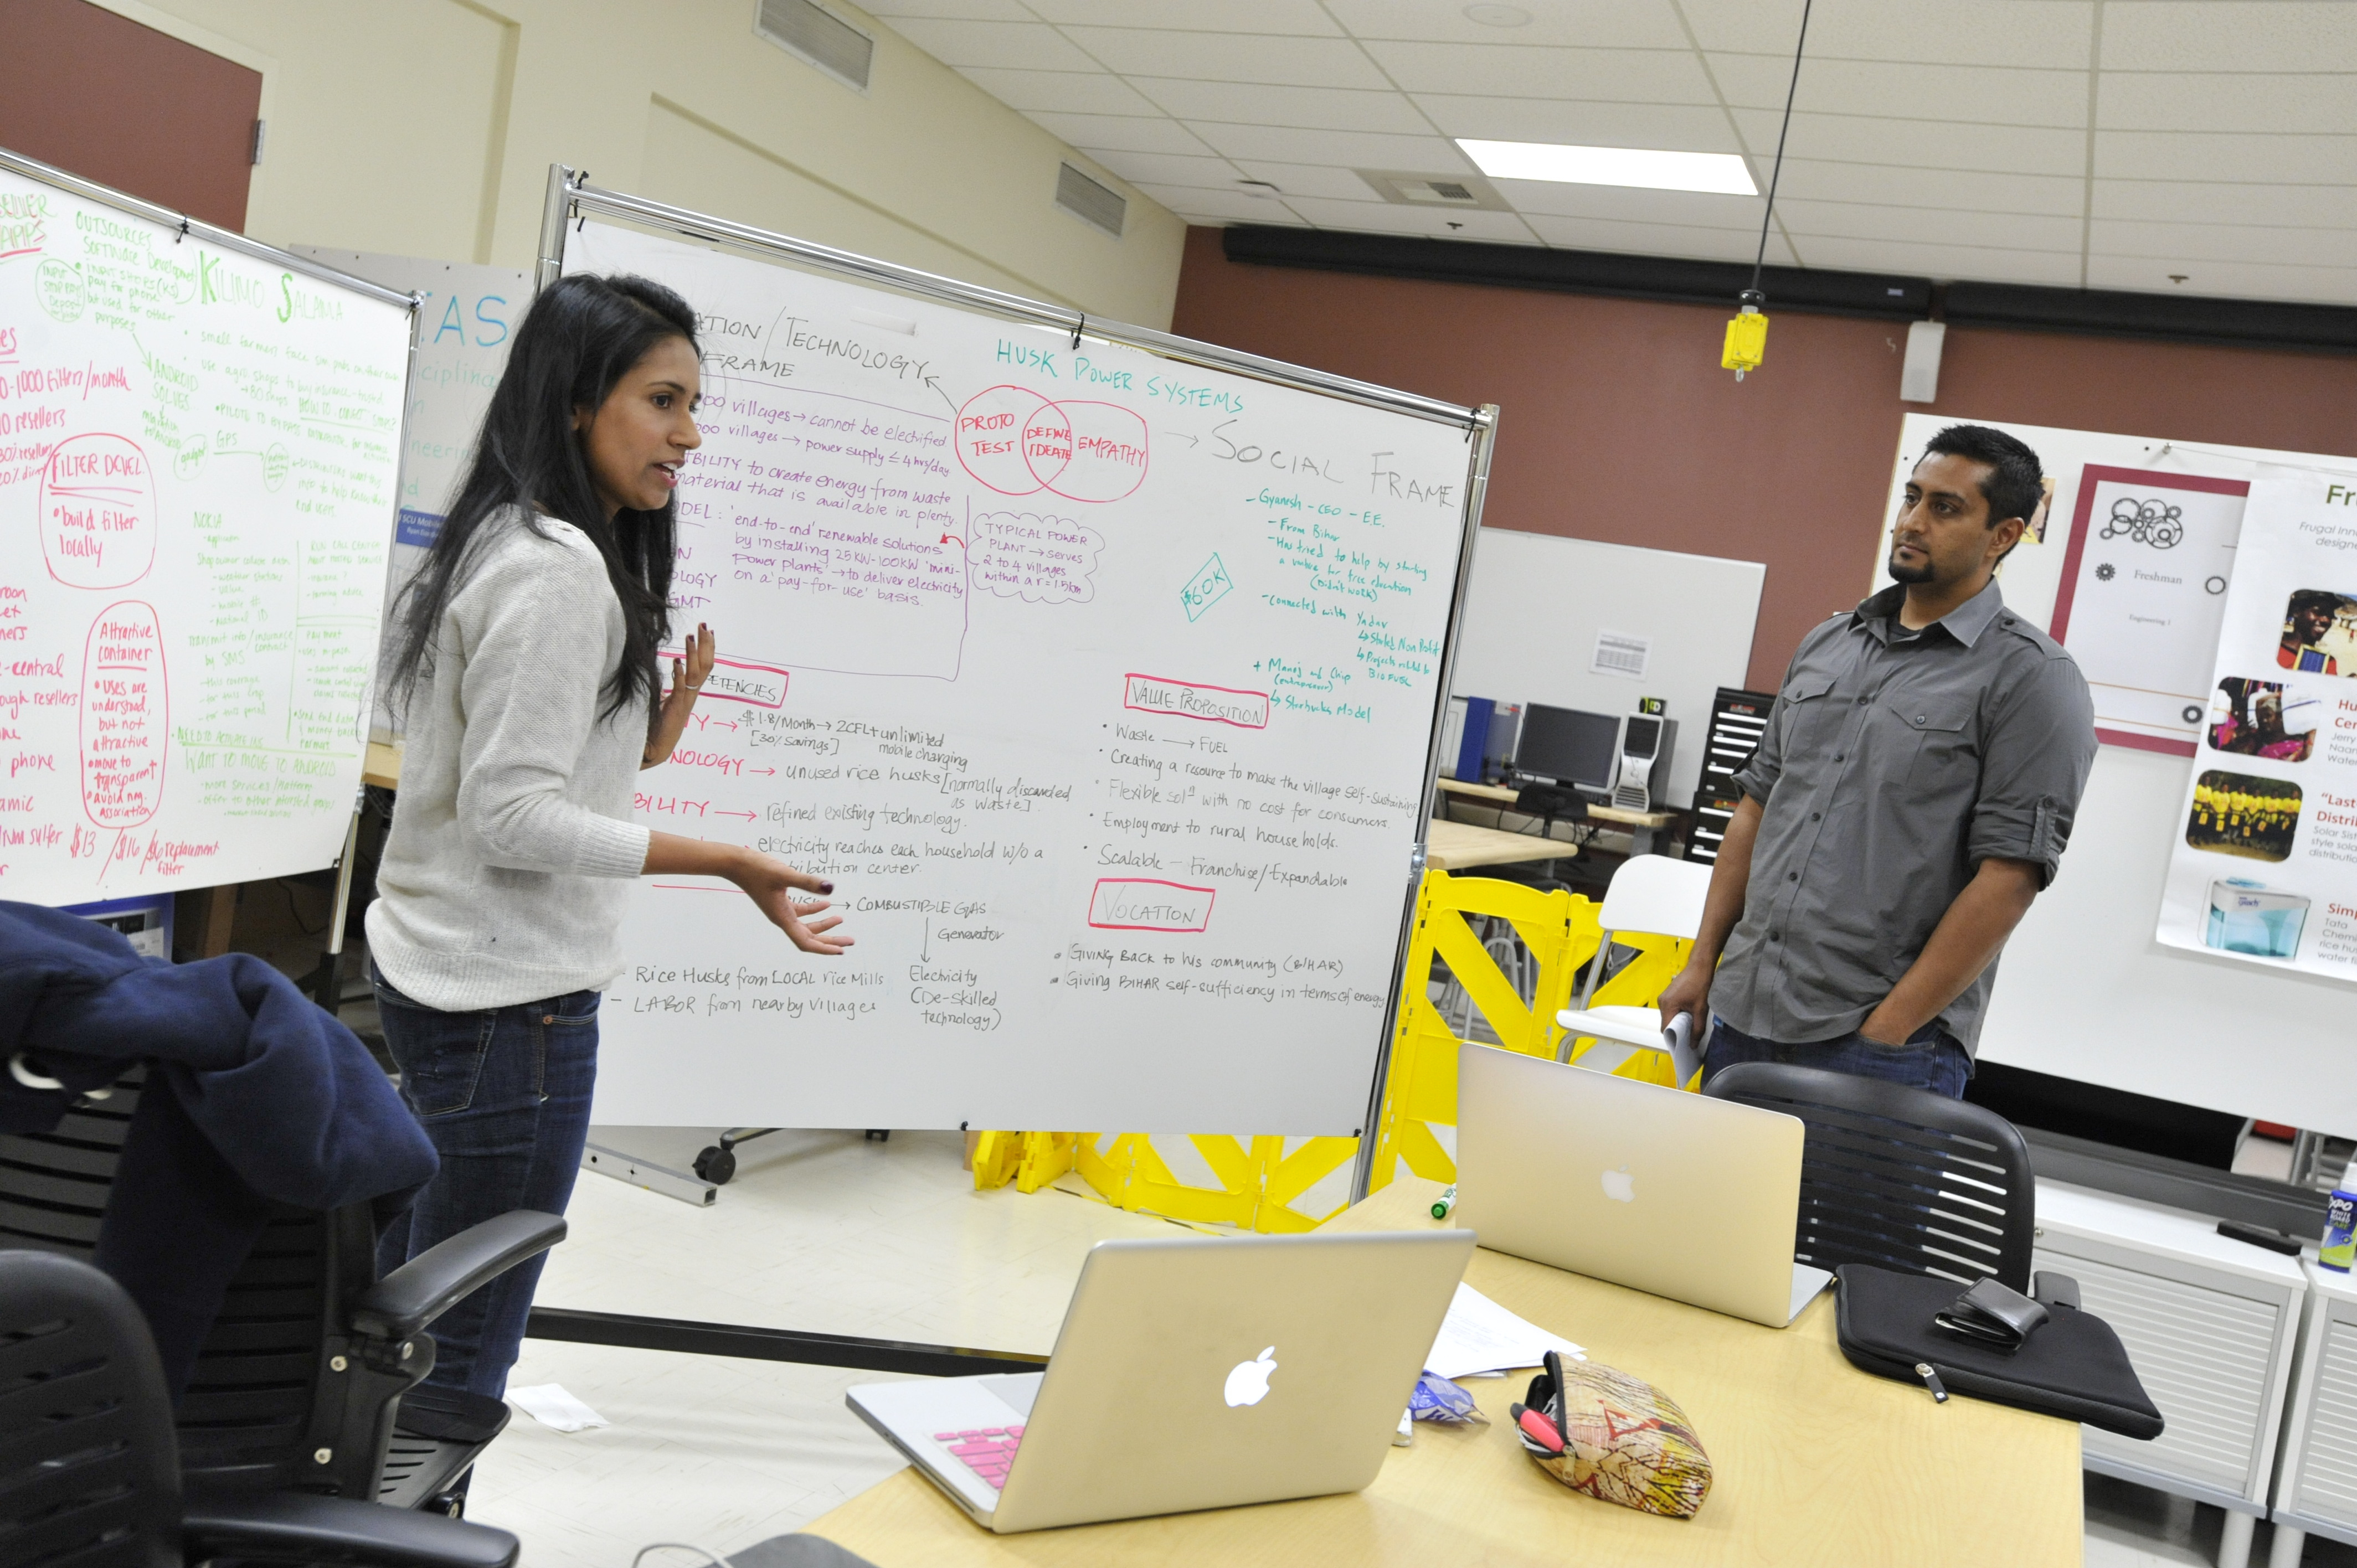 Two students stand in front of a white board with brainstorming work on it, presenting to colleagues.